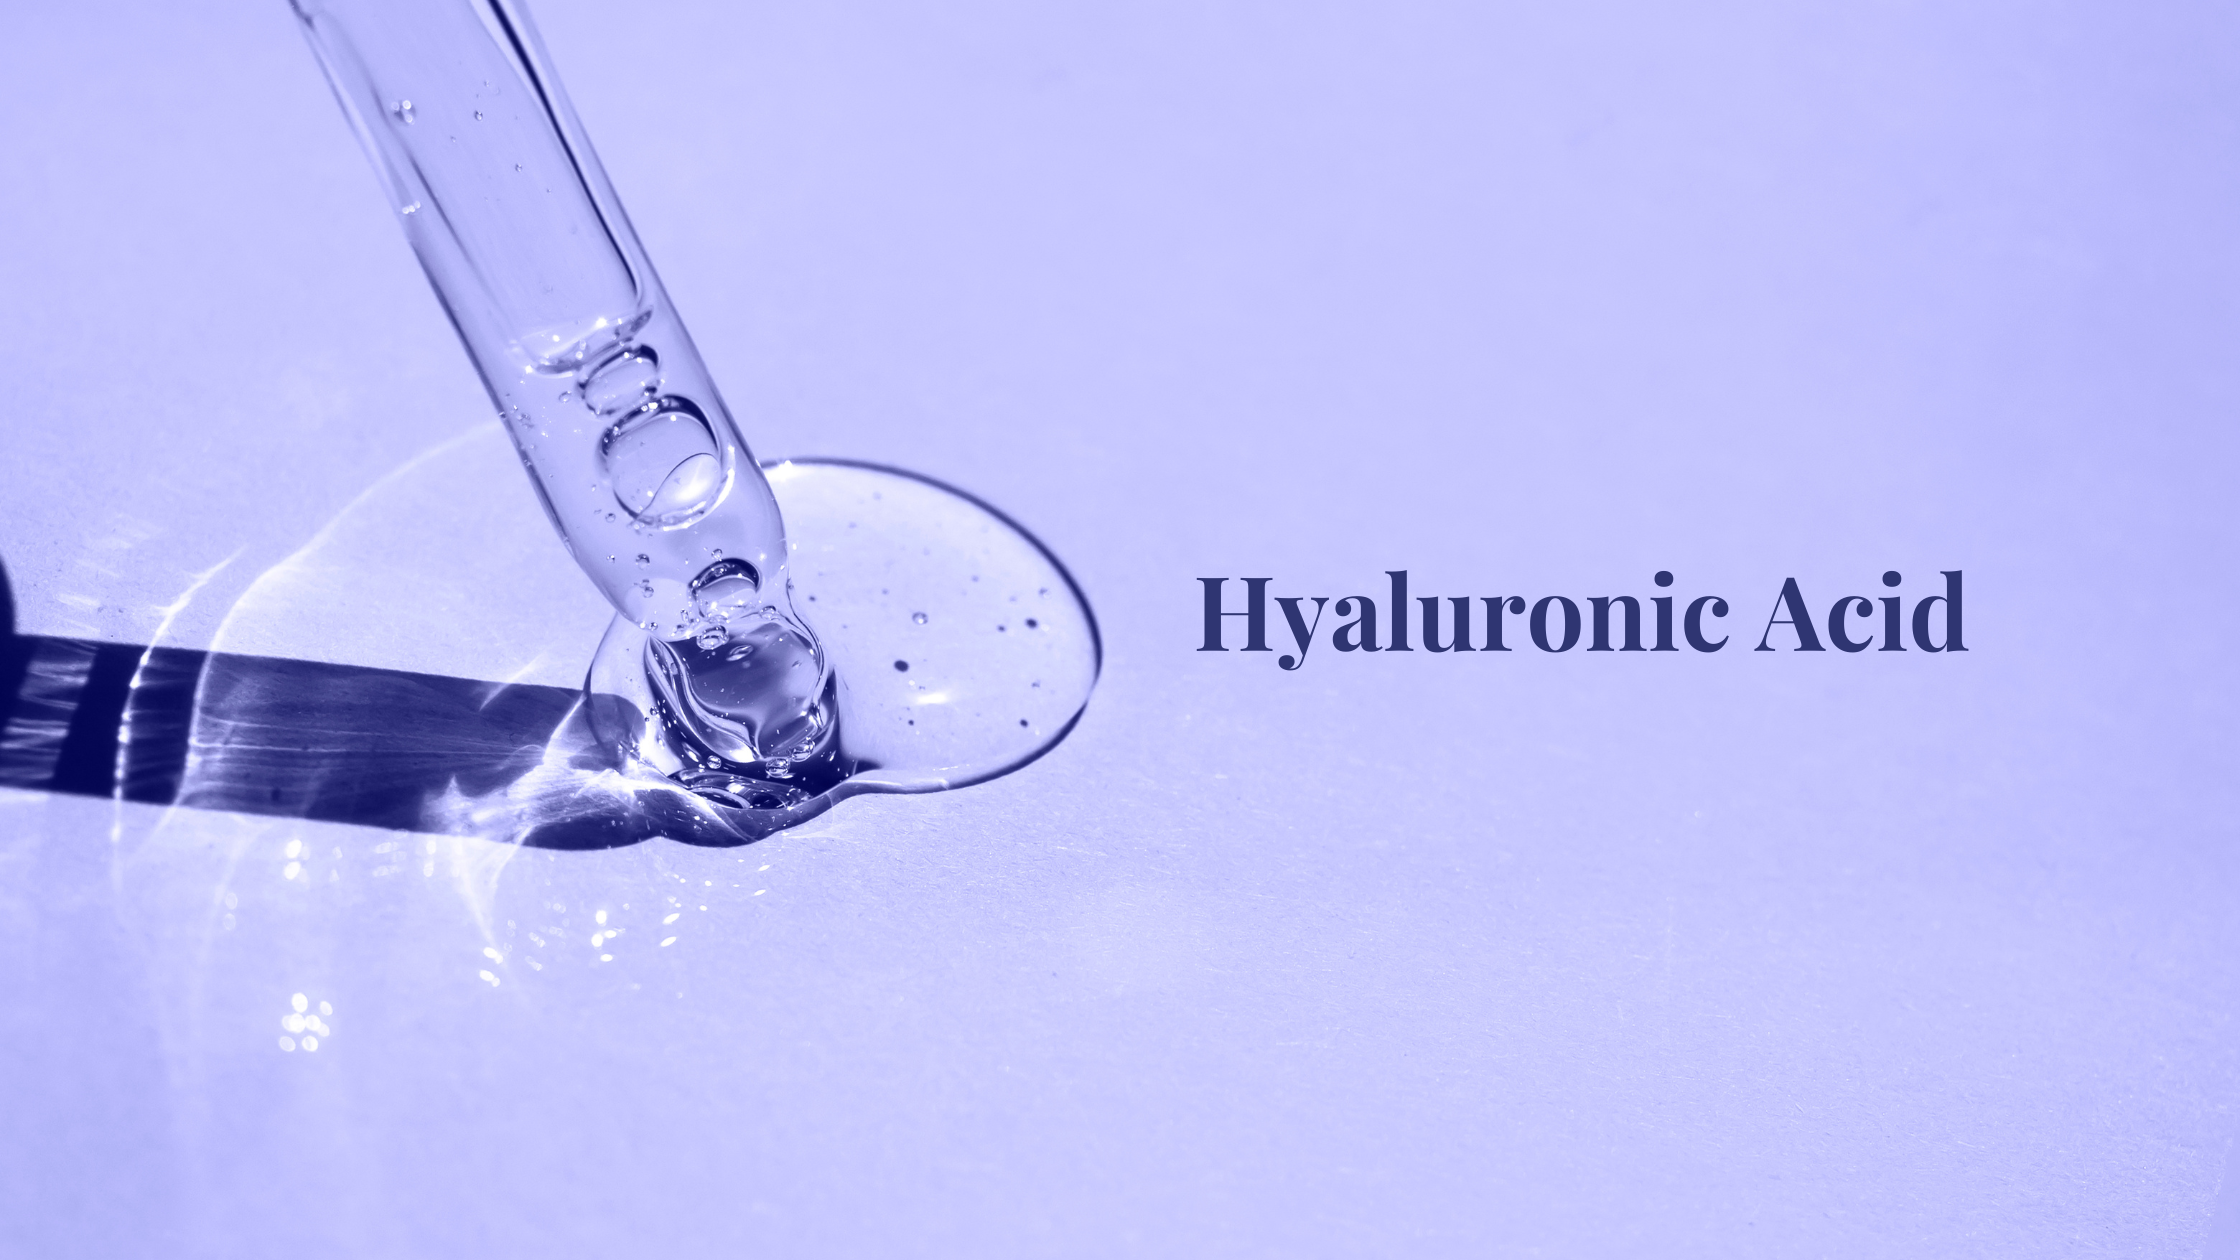 Hyaluronic acid serum dripping from a medicine dropper in a skin care product